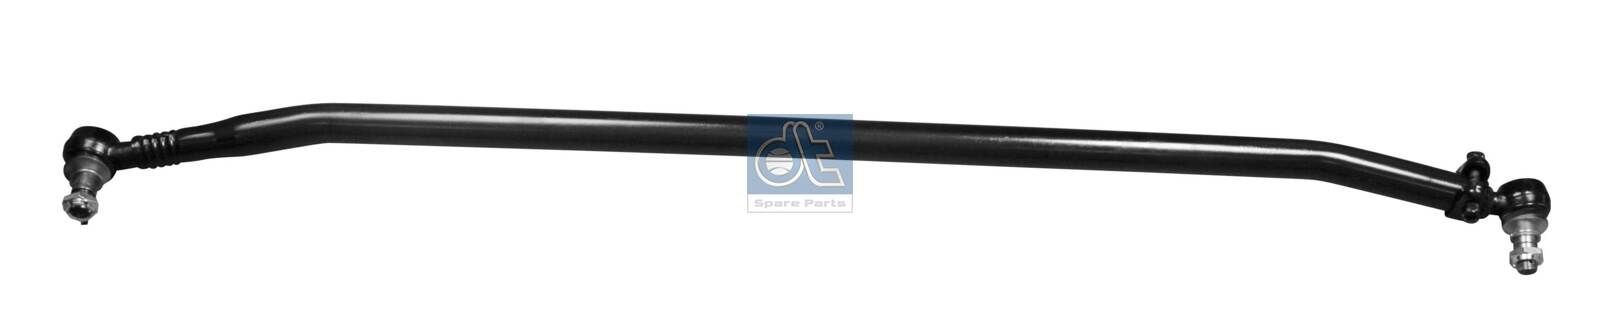 DT Spare Parts Front Axle Cone Size: 30mm, Length: 1750mm Tie Rod 6.53004 buy